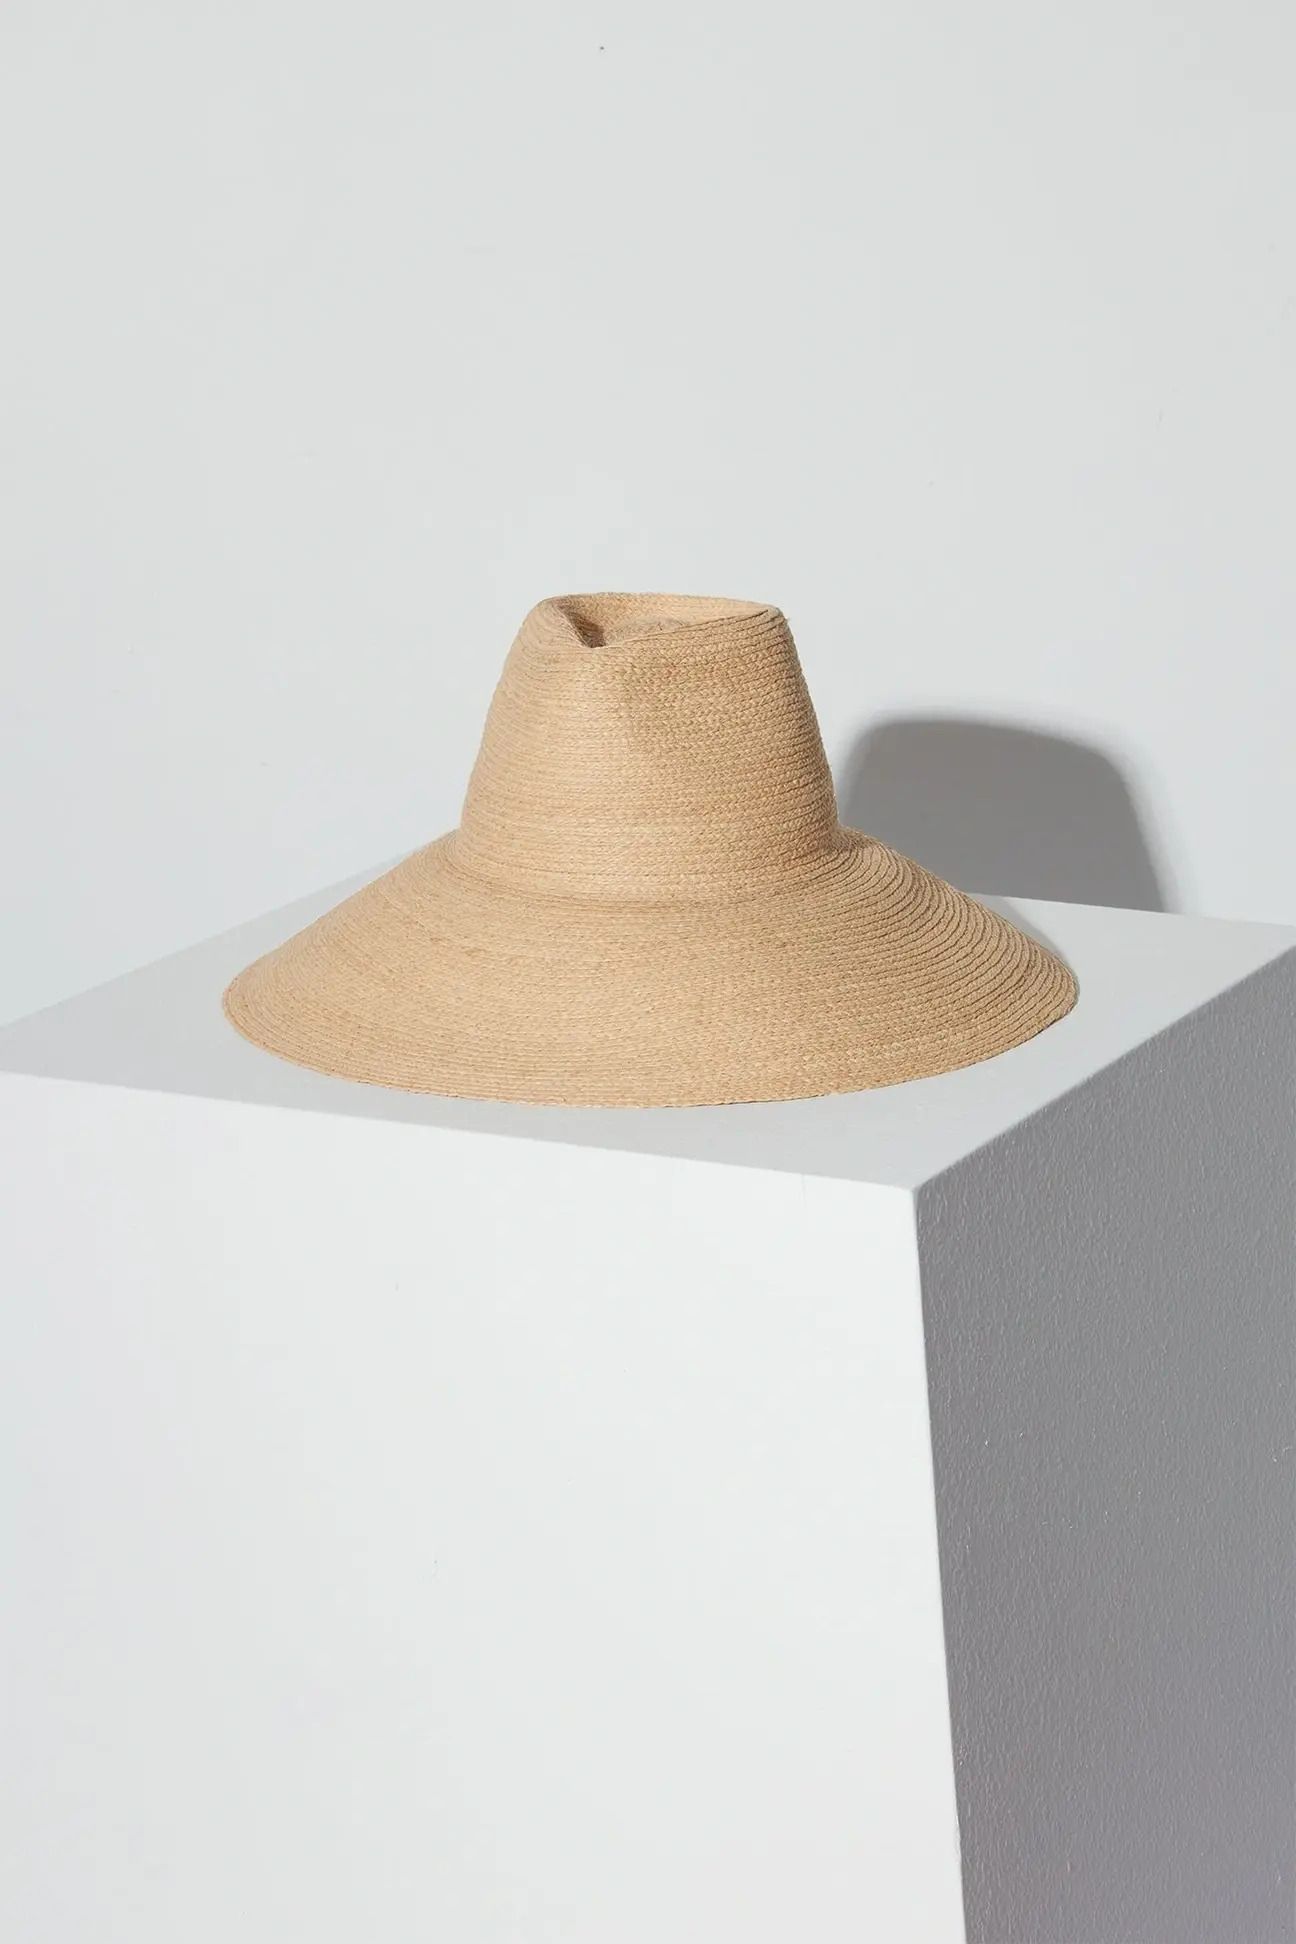 Home Away From Home: How to Sew a Folding Sun Hat